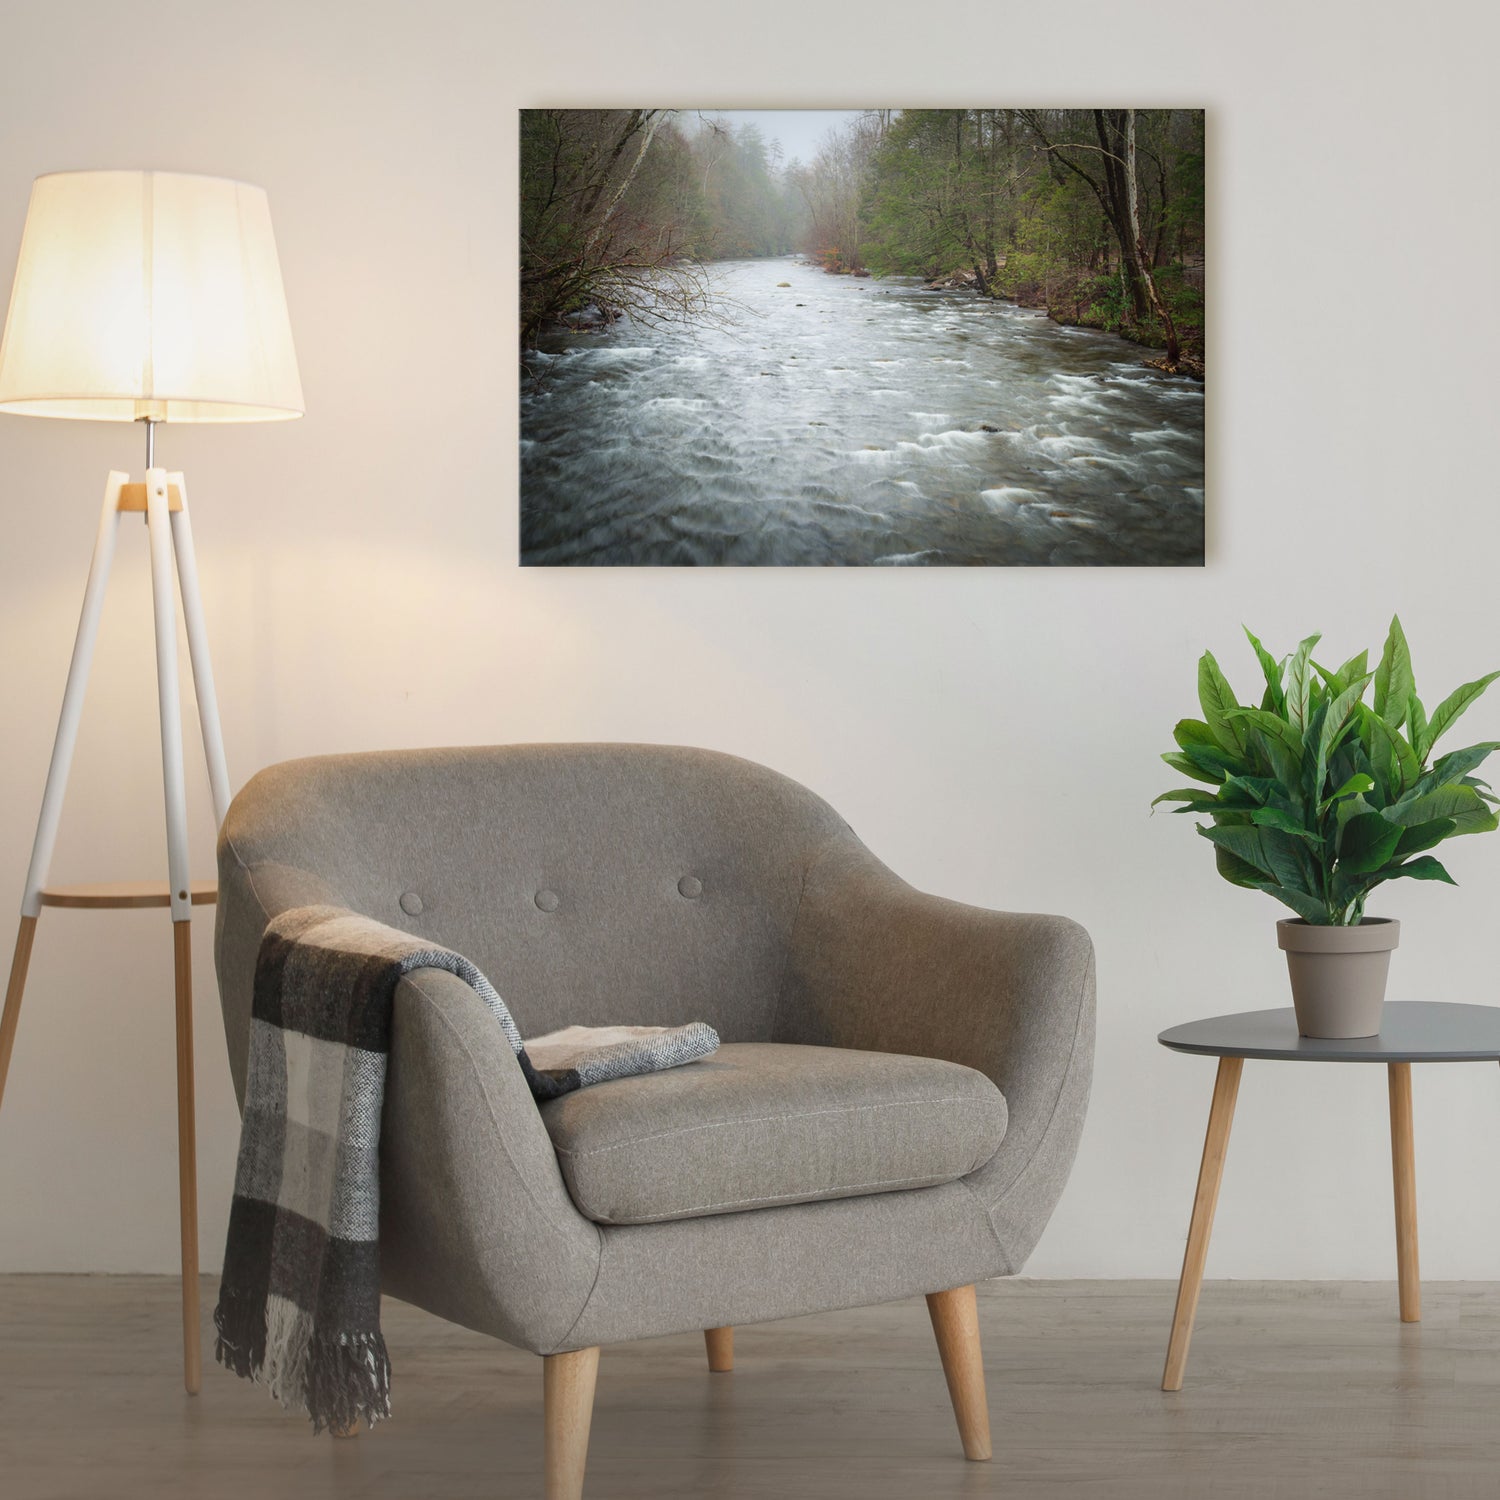 A simple art piece that takes you to the calm banks of the Little River in the Smoky Mountains.